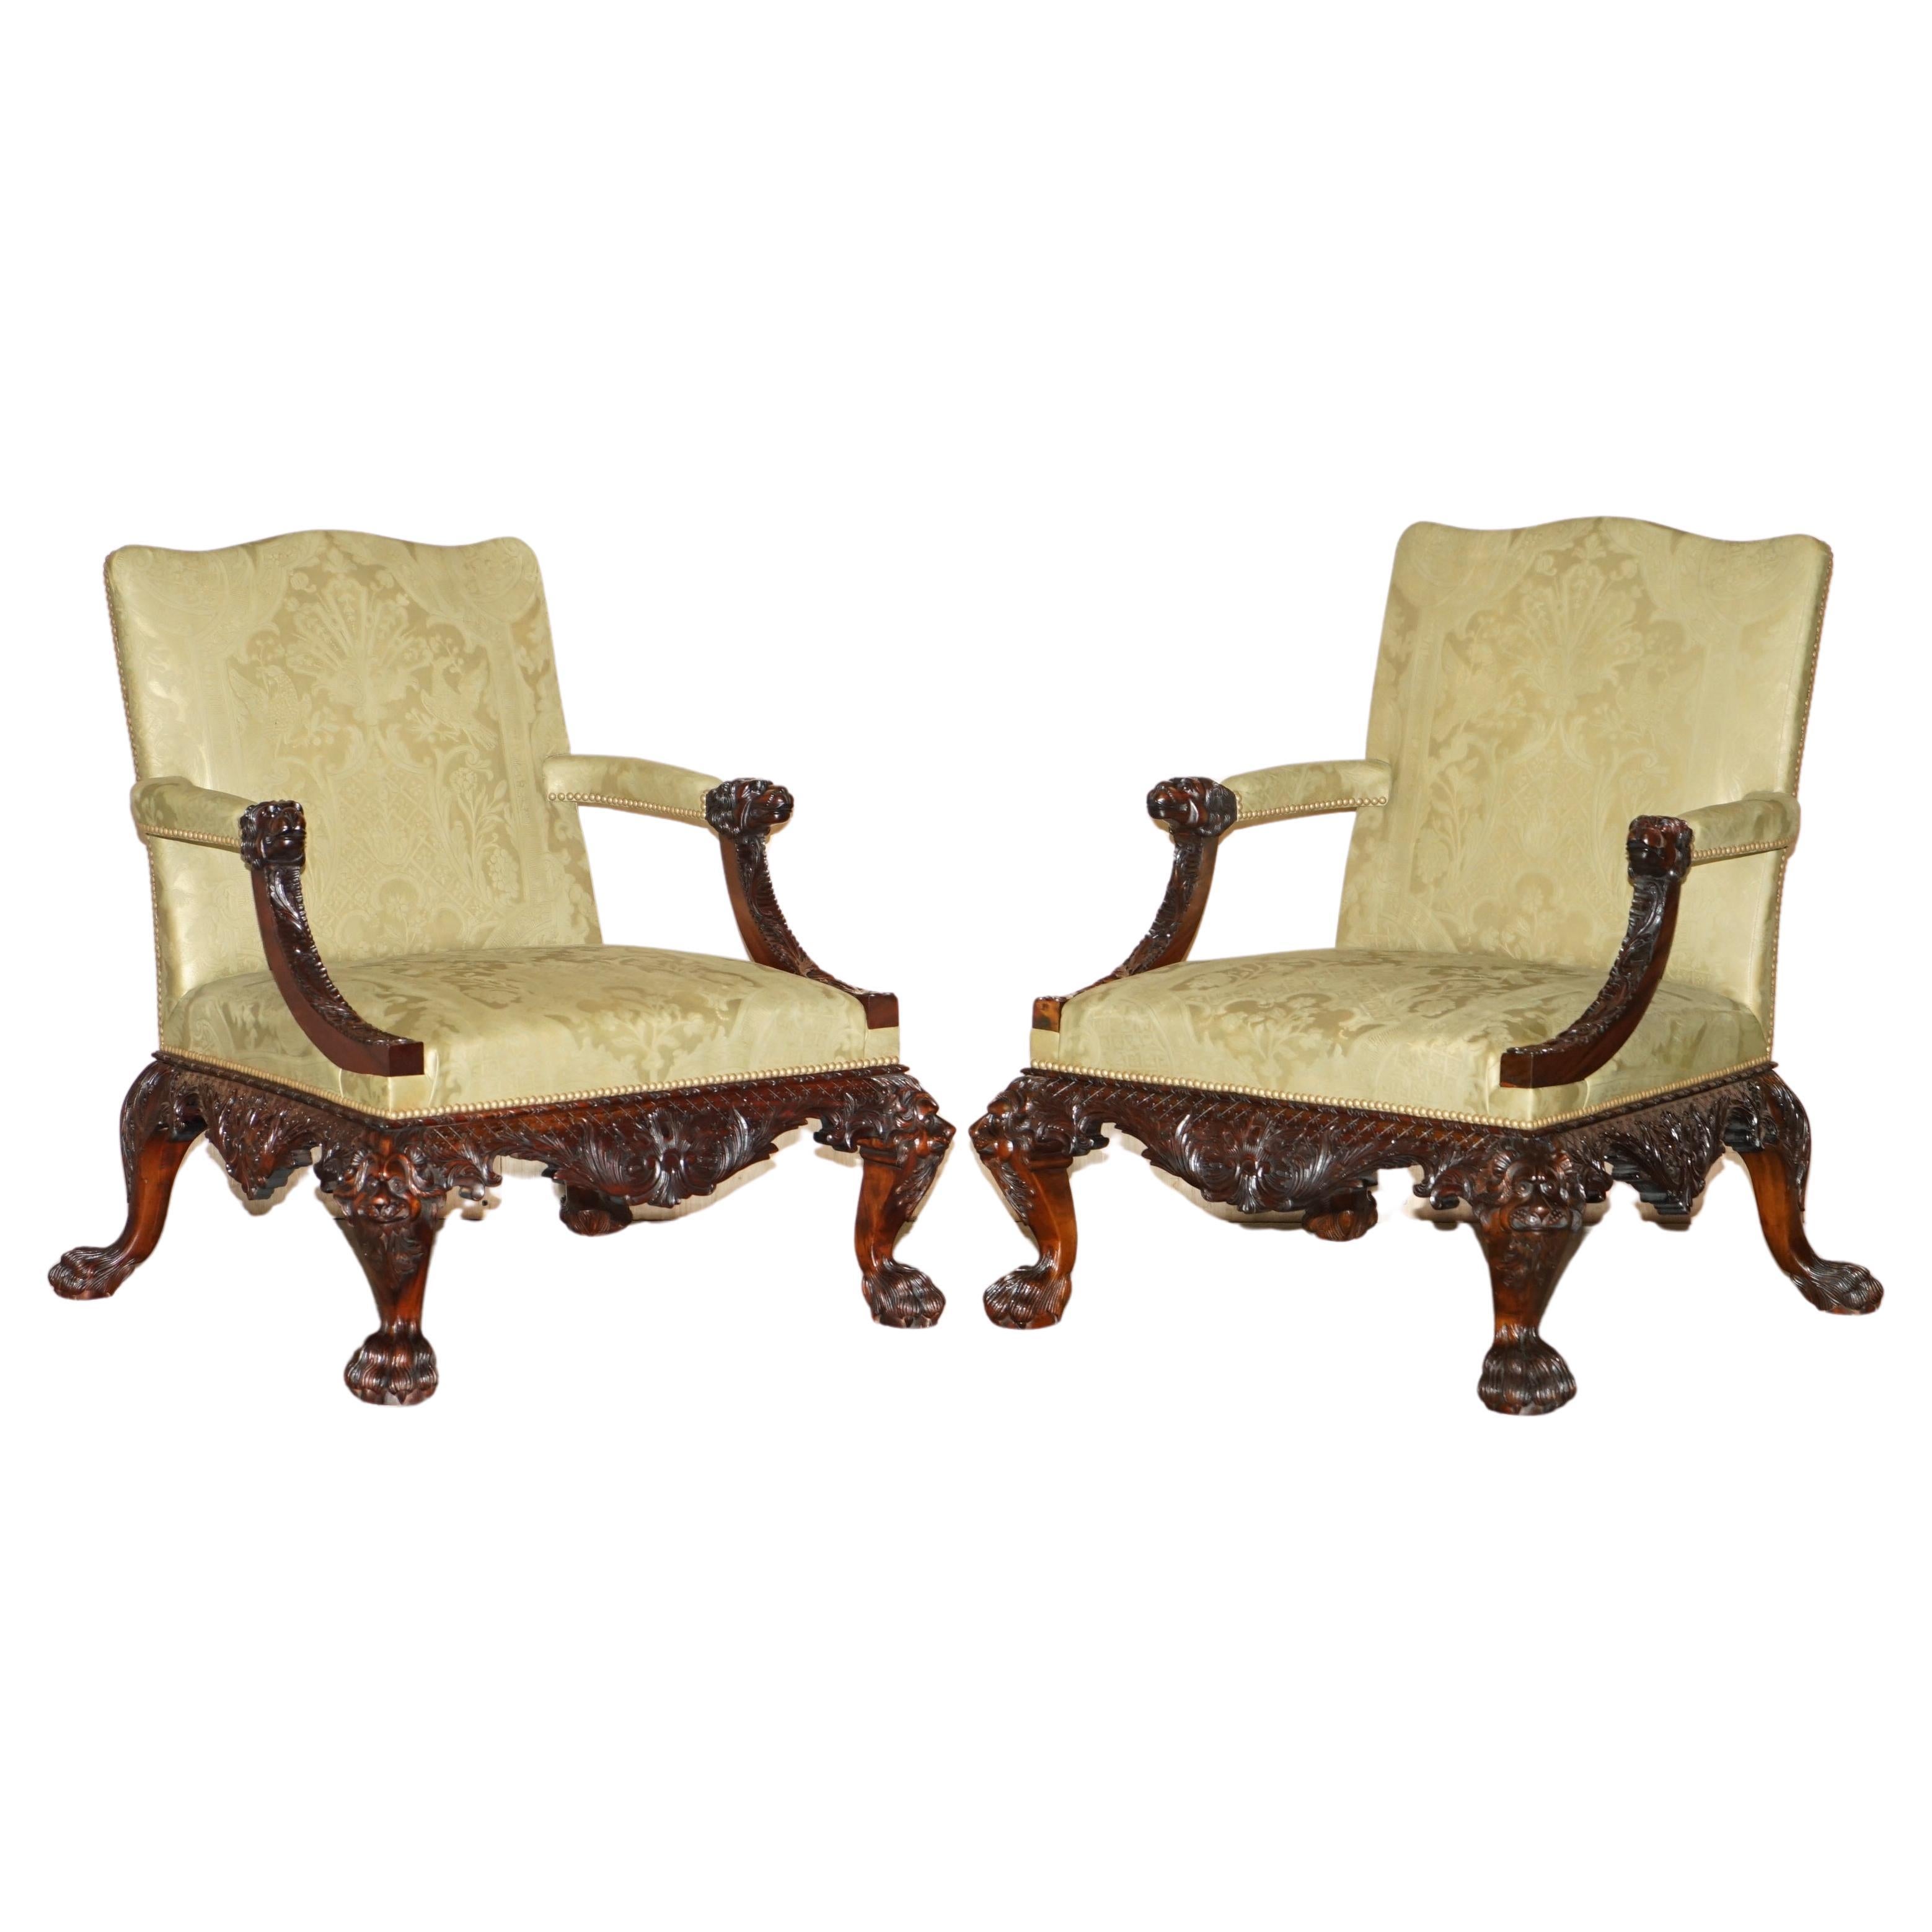 FINE PAiR OF LARGE CARved GAINSBOROUGH ARMCHAIRS AFTER GILES GRENDEY 1693-1780 im Angebot